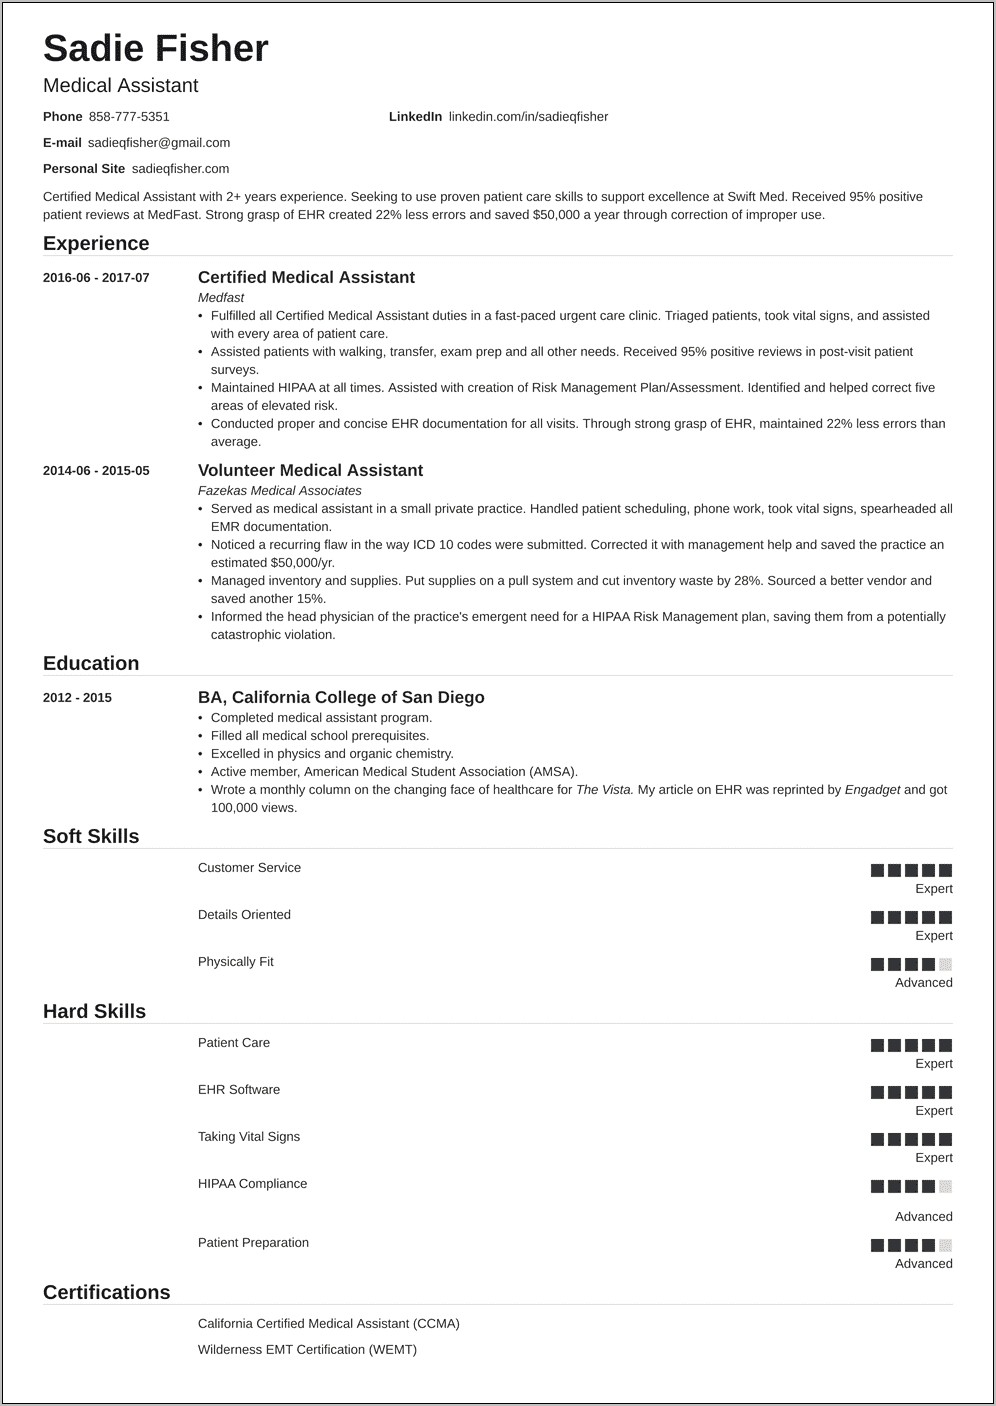 Medical Assistant Resume Objective Examples Monster.commonster